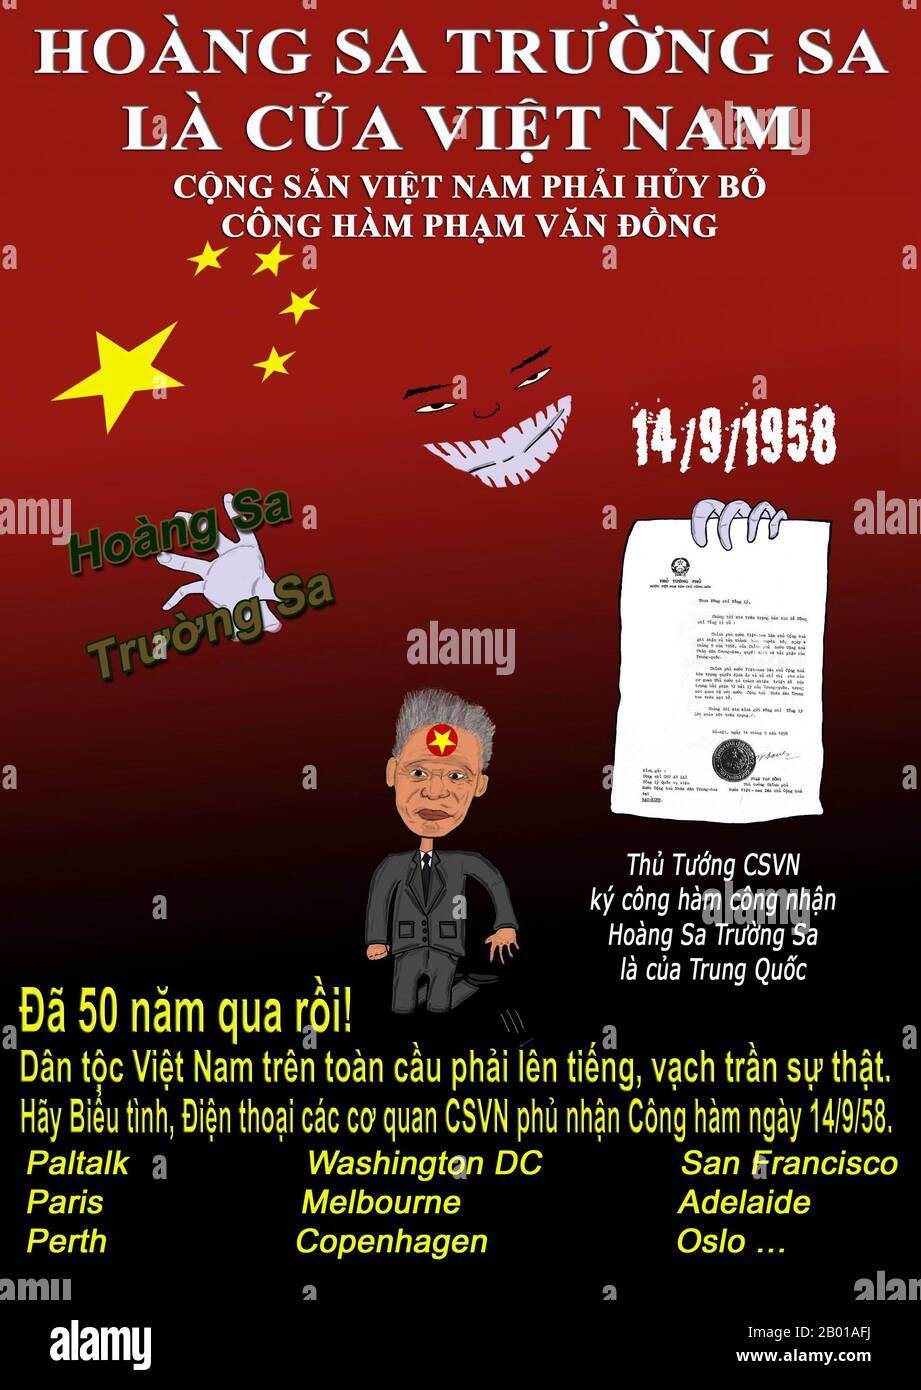 Vietnam/USA: Poster issued by Overseas Vietnamese in the USA attacking North Vietnam's Pham Van Dong for acquiescing to Chinese maritime claims in 1958.  In 1958, the People's Republic of China, having taken over mainland China and having left the Republic of China with control over Taiwan, Penghu, Kinmen, Matsu, and some outlying islands, issued a declaration of a 12 nautical mile limit territorial waters that encompassed the Spratly Islands. North Vietnam's prime minister, Phạm Văn Đồng, sent a formal note to recognise these claims. Stock Photo